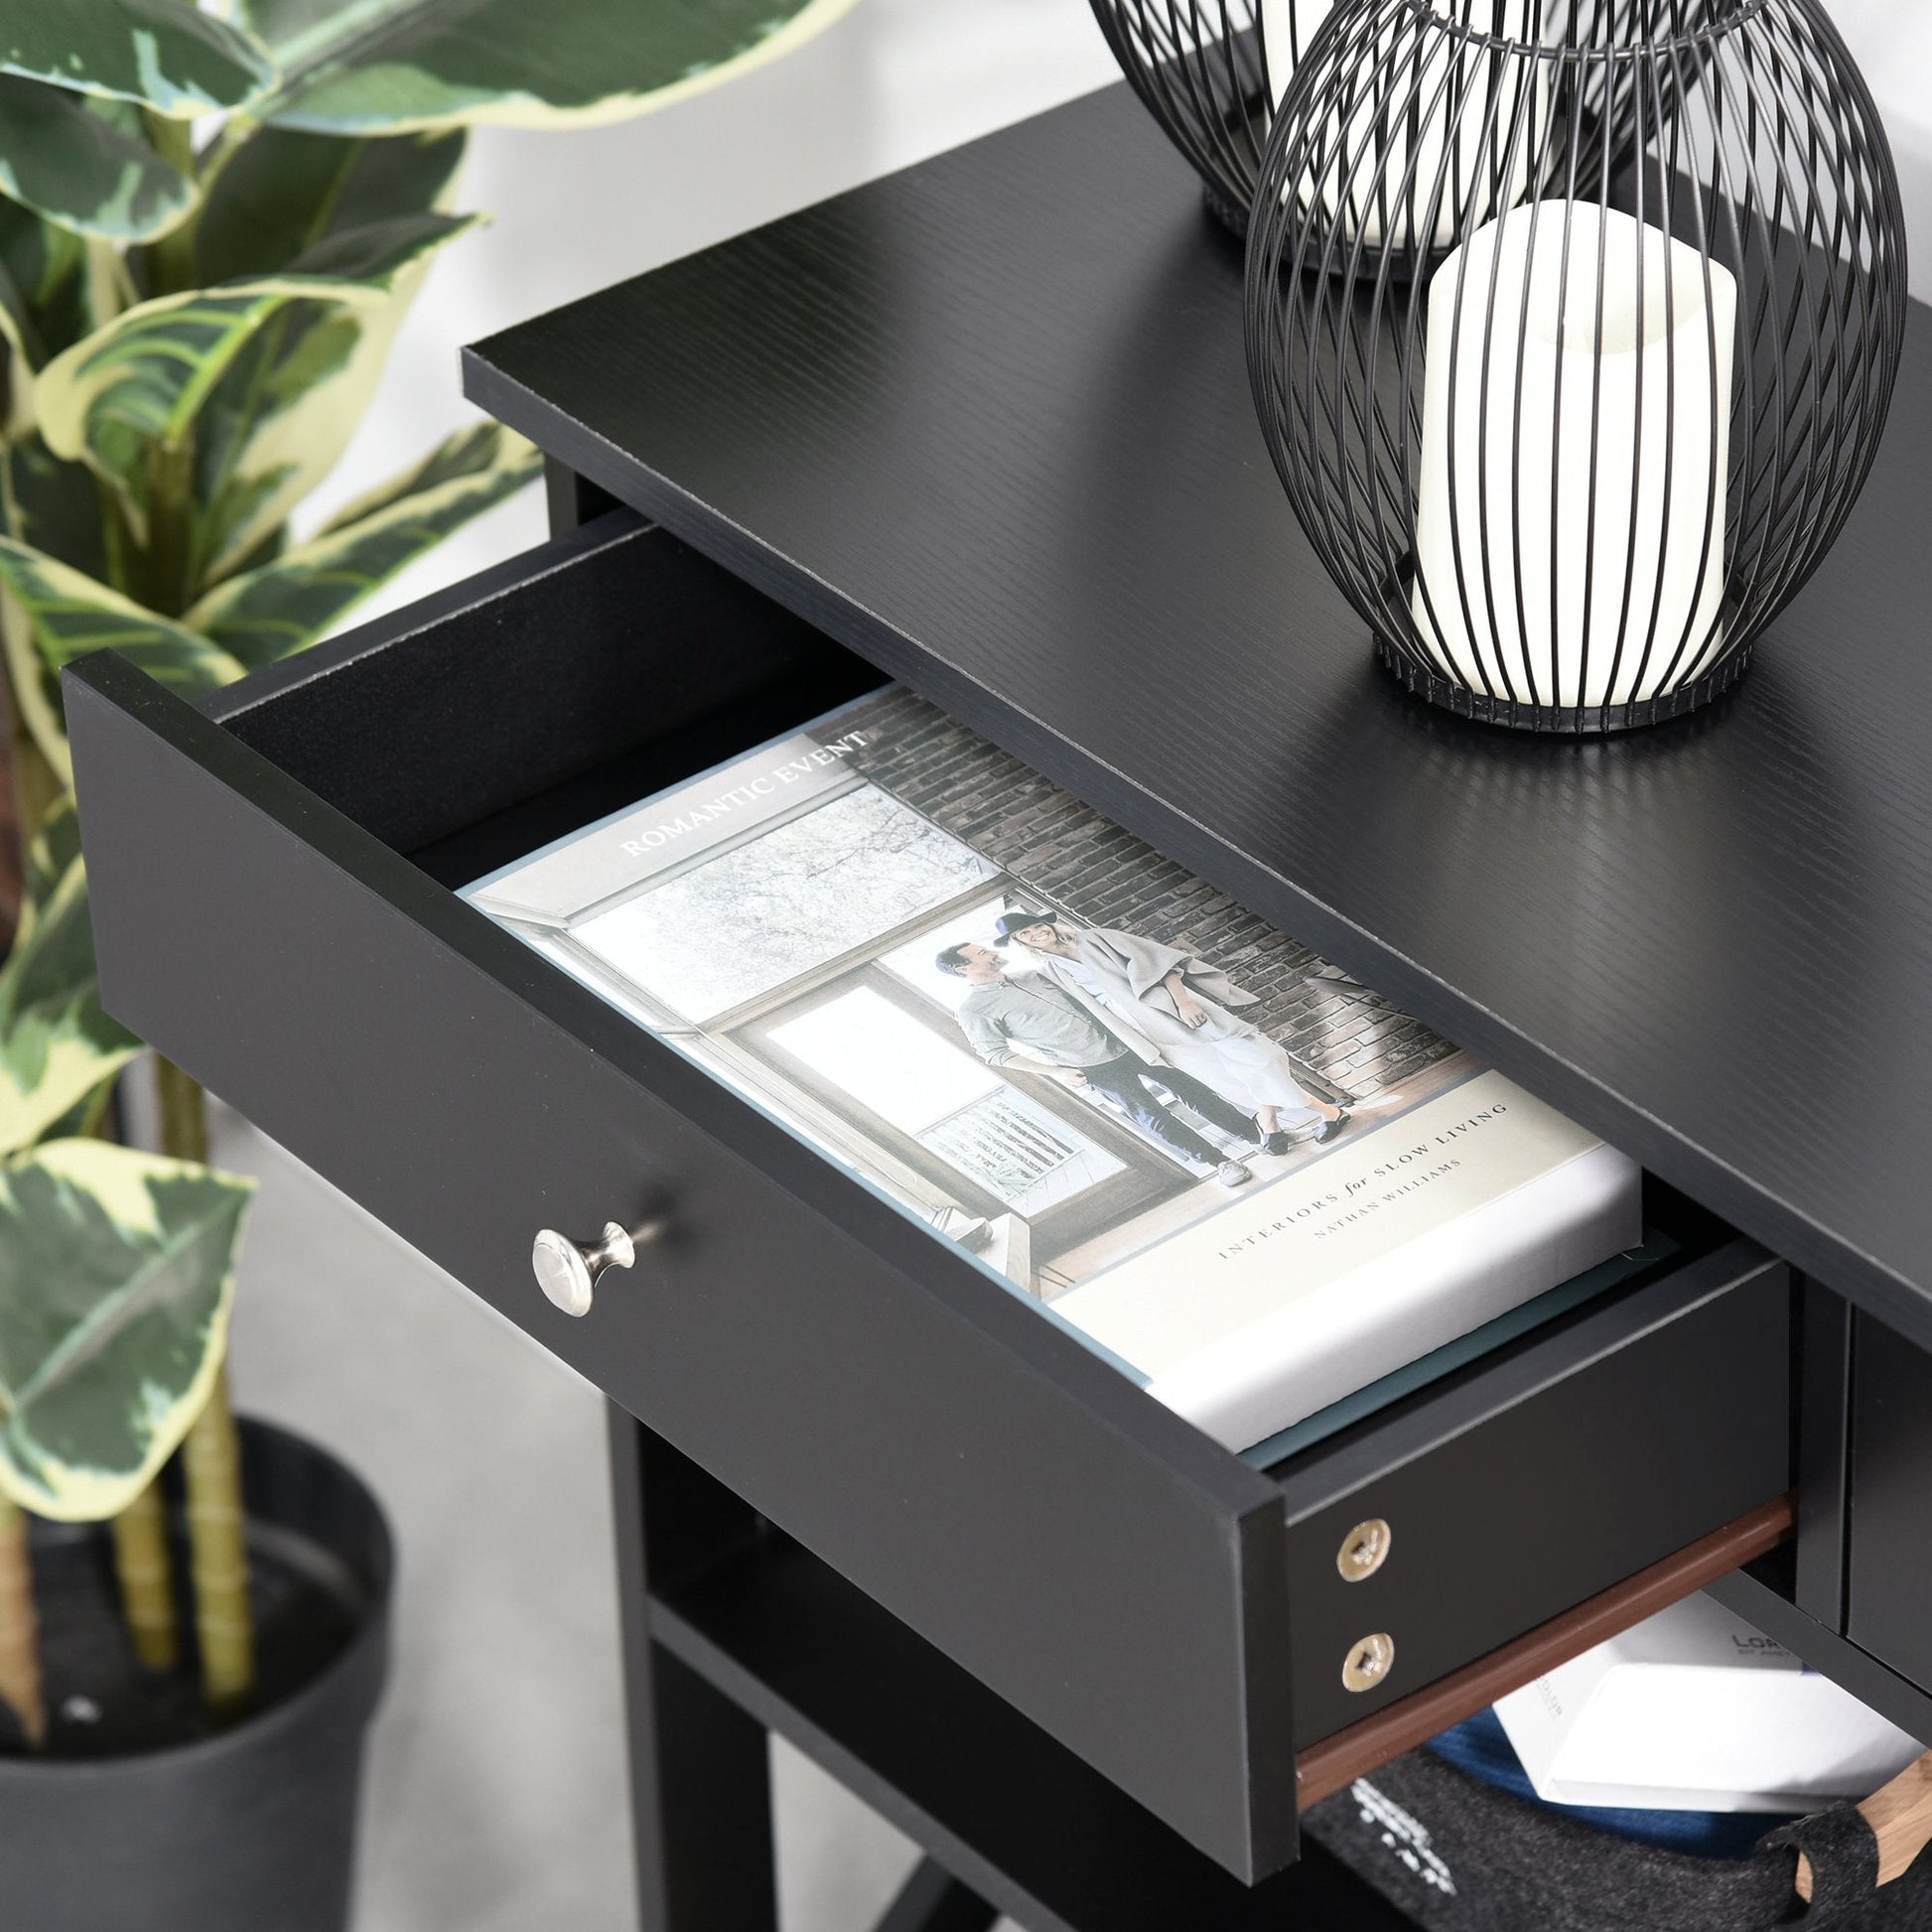 Console Table Sofa Side Desk with Storage Shelves Drawers X Frame for Living Room Entryway Black - Gallery Canada